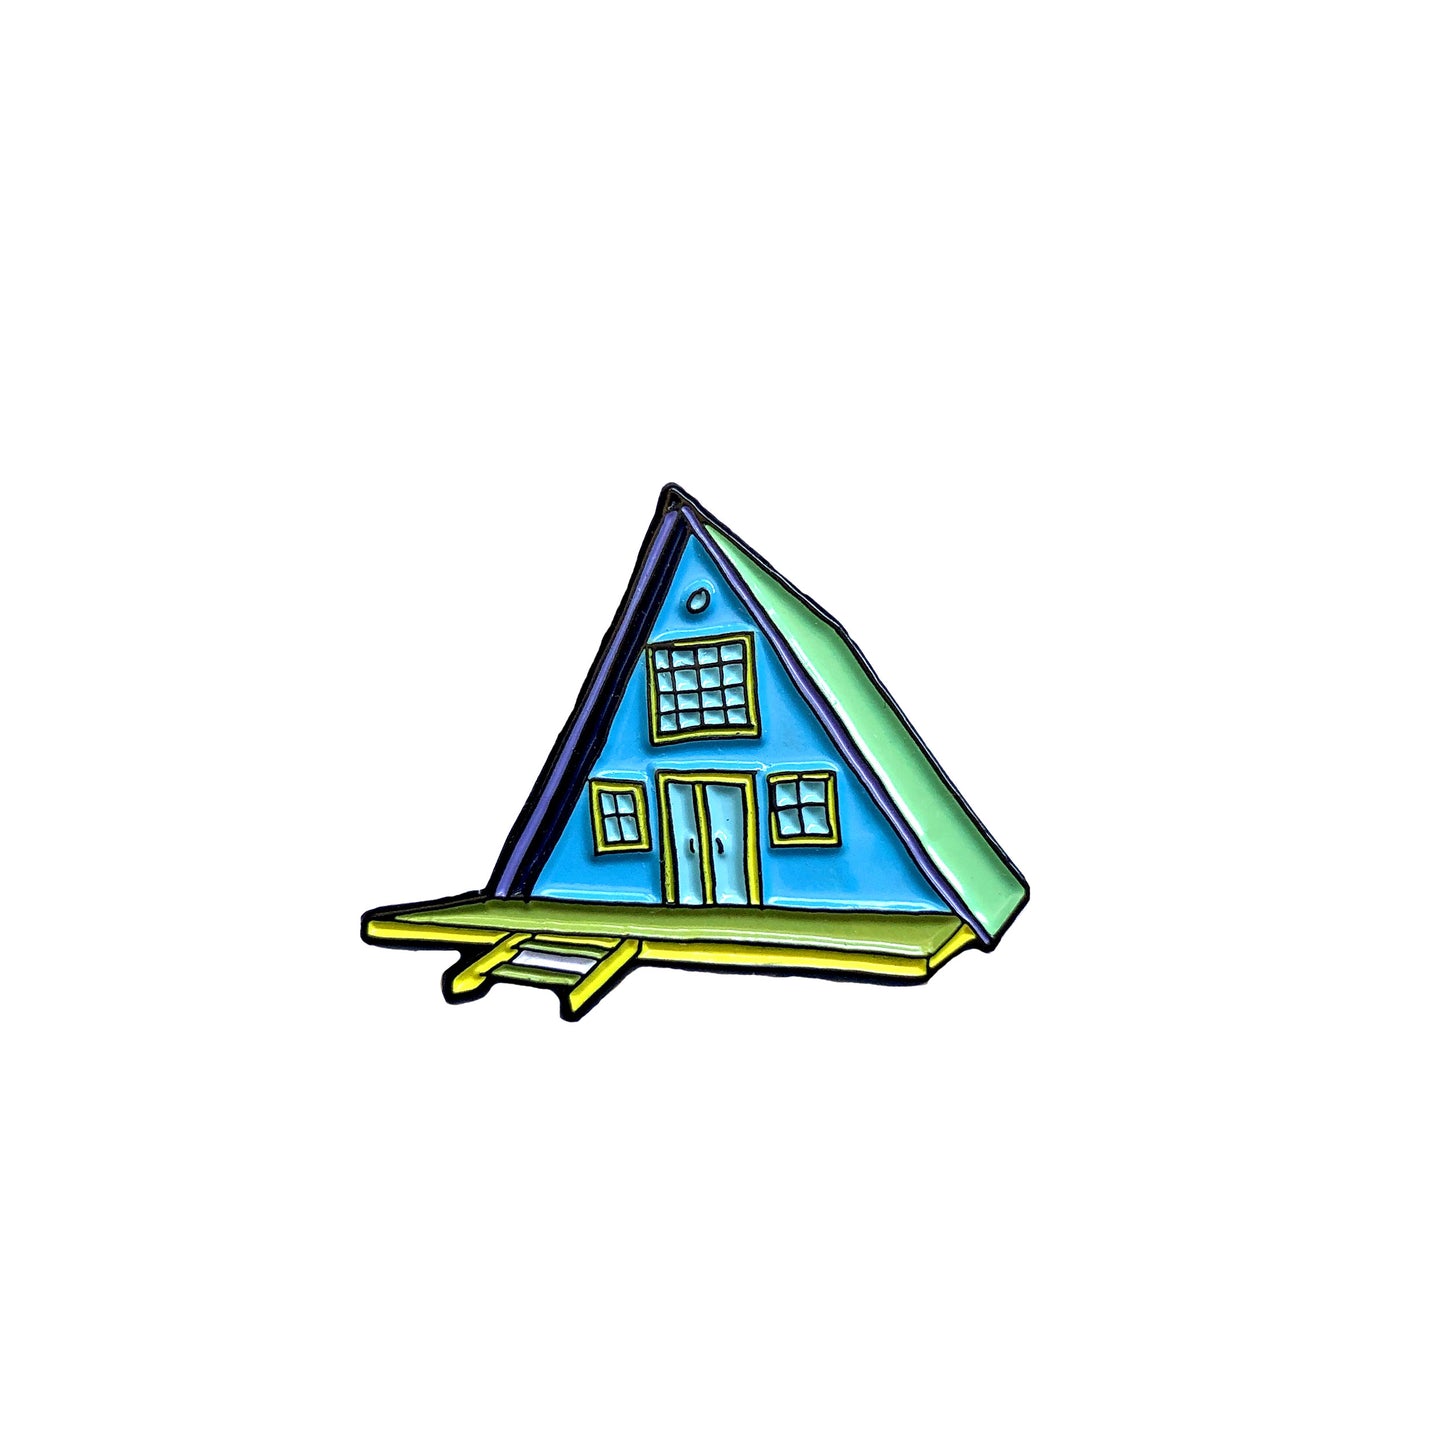 Camping pin in the shape of an a-frame cabin